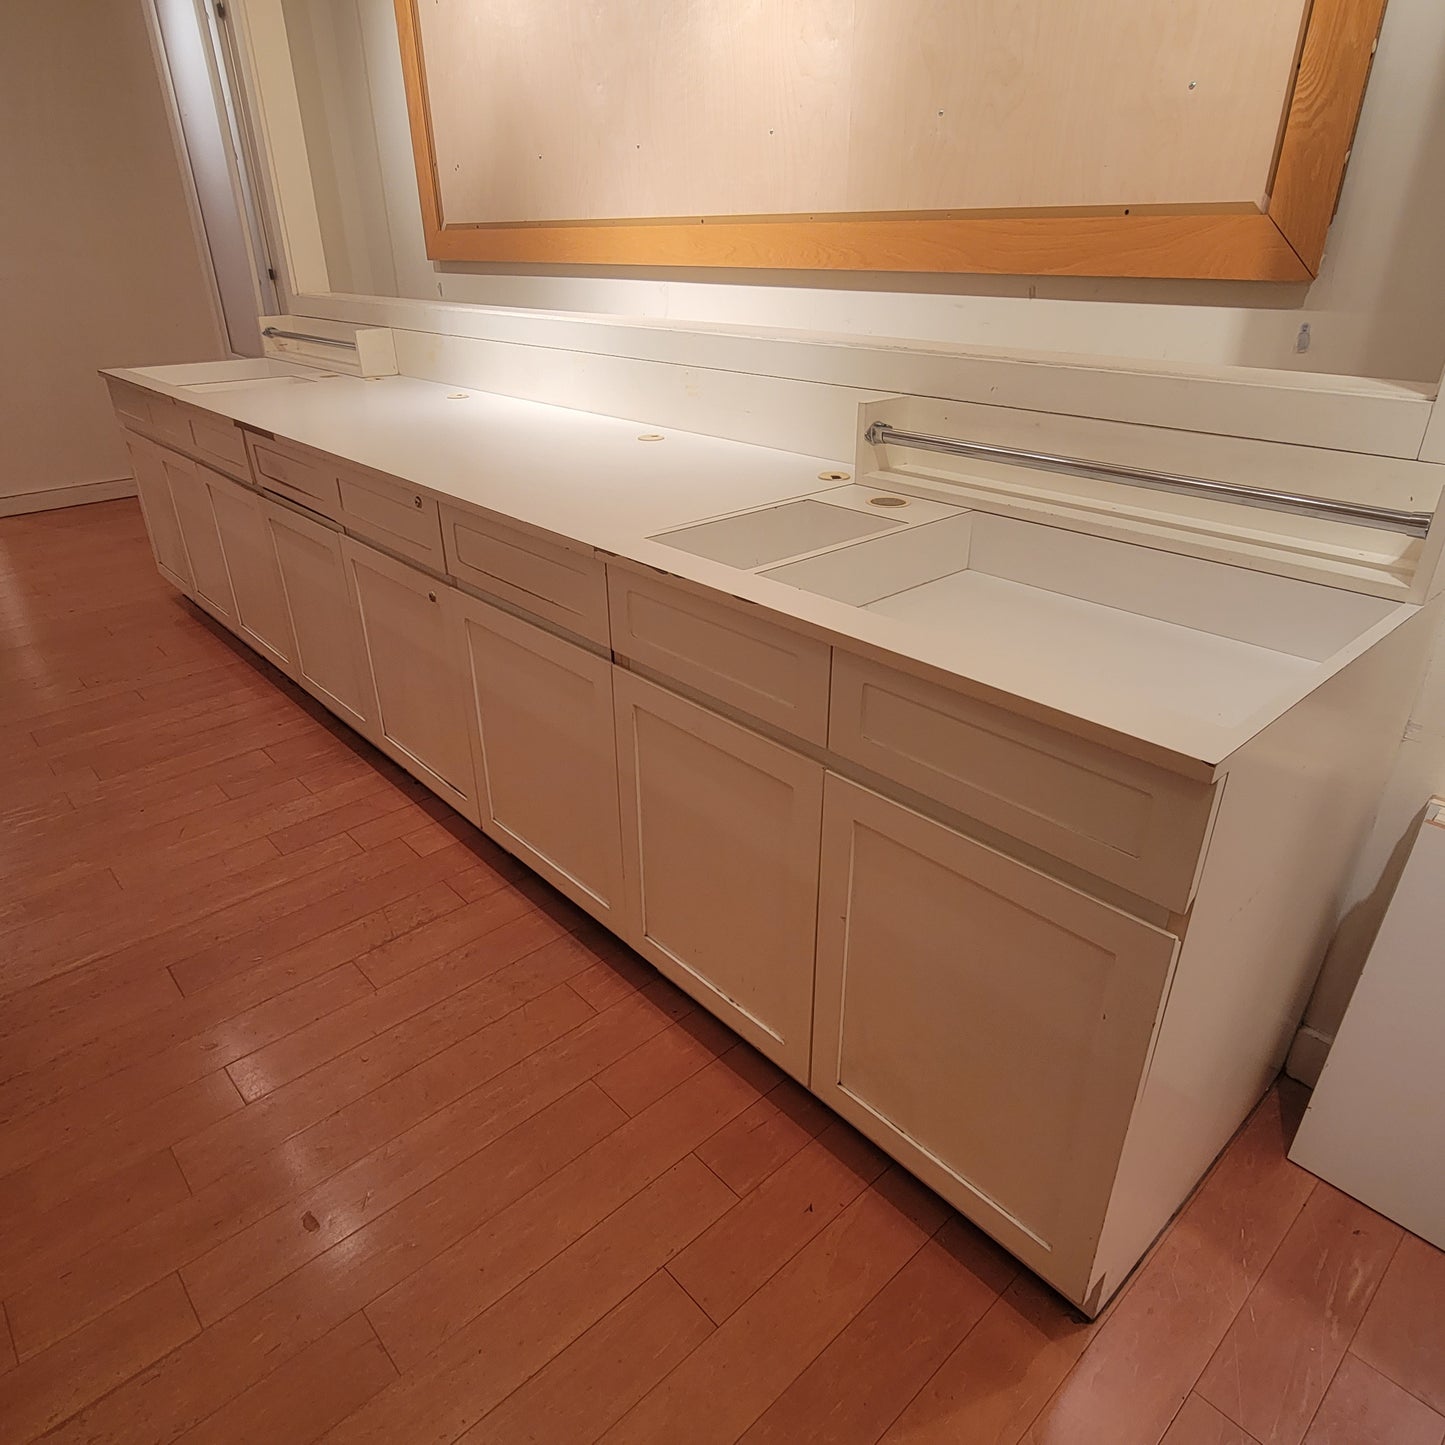 Countertop w/Drawers and Cabinets